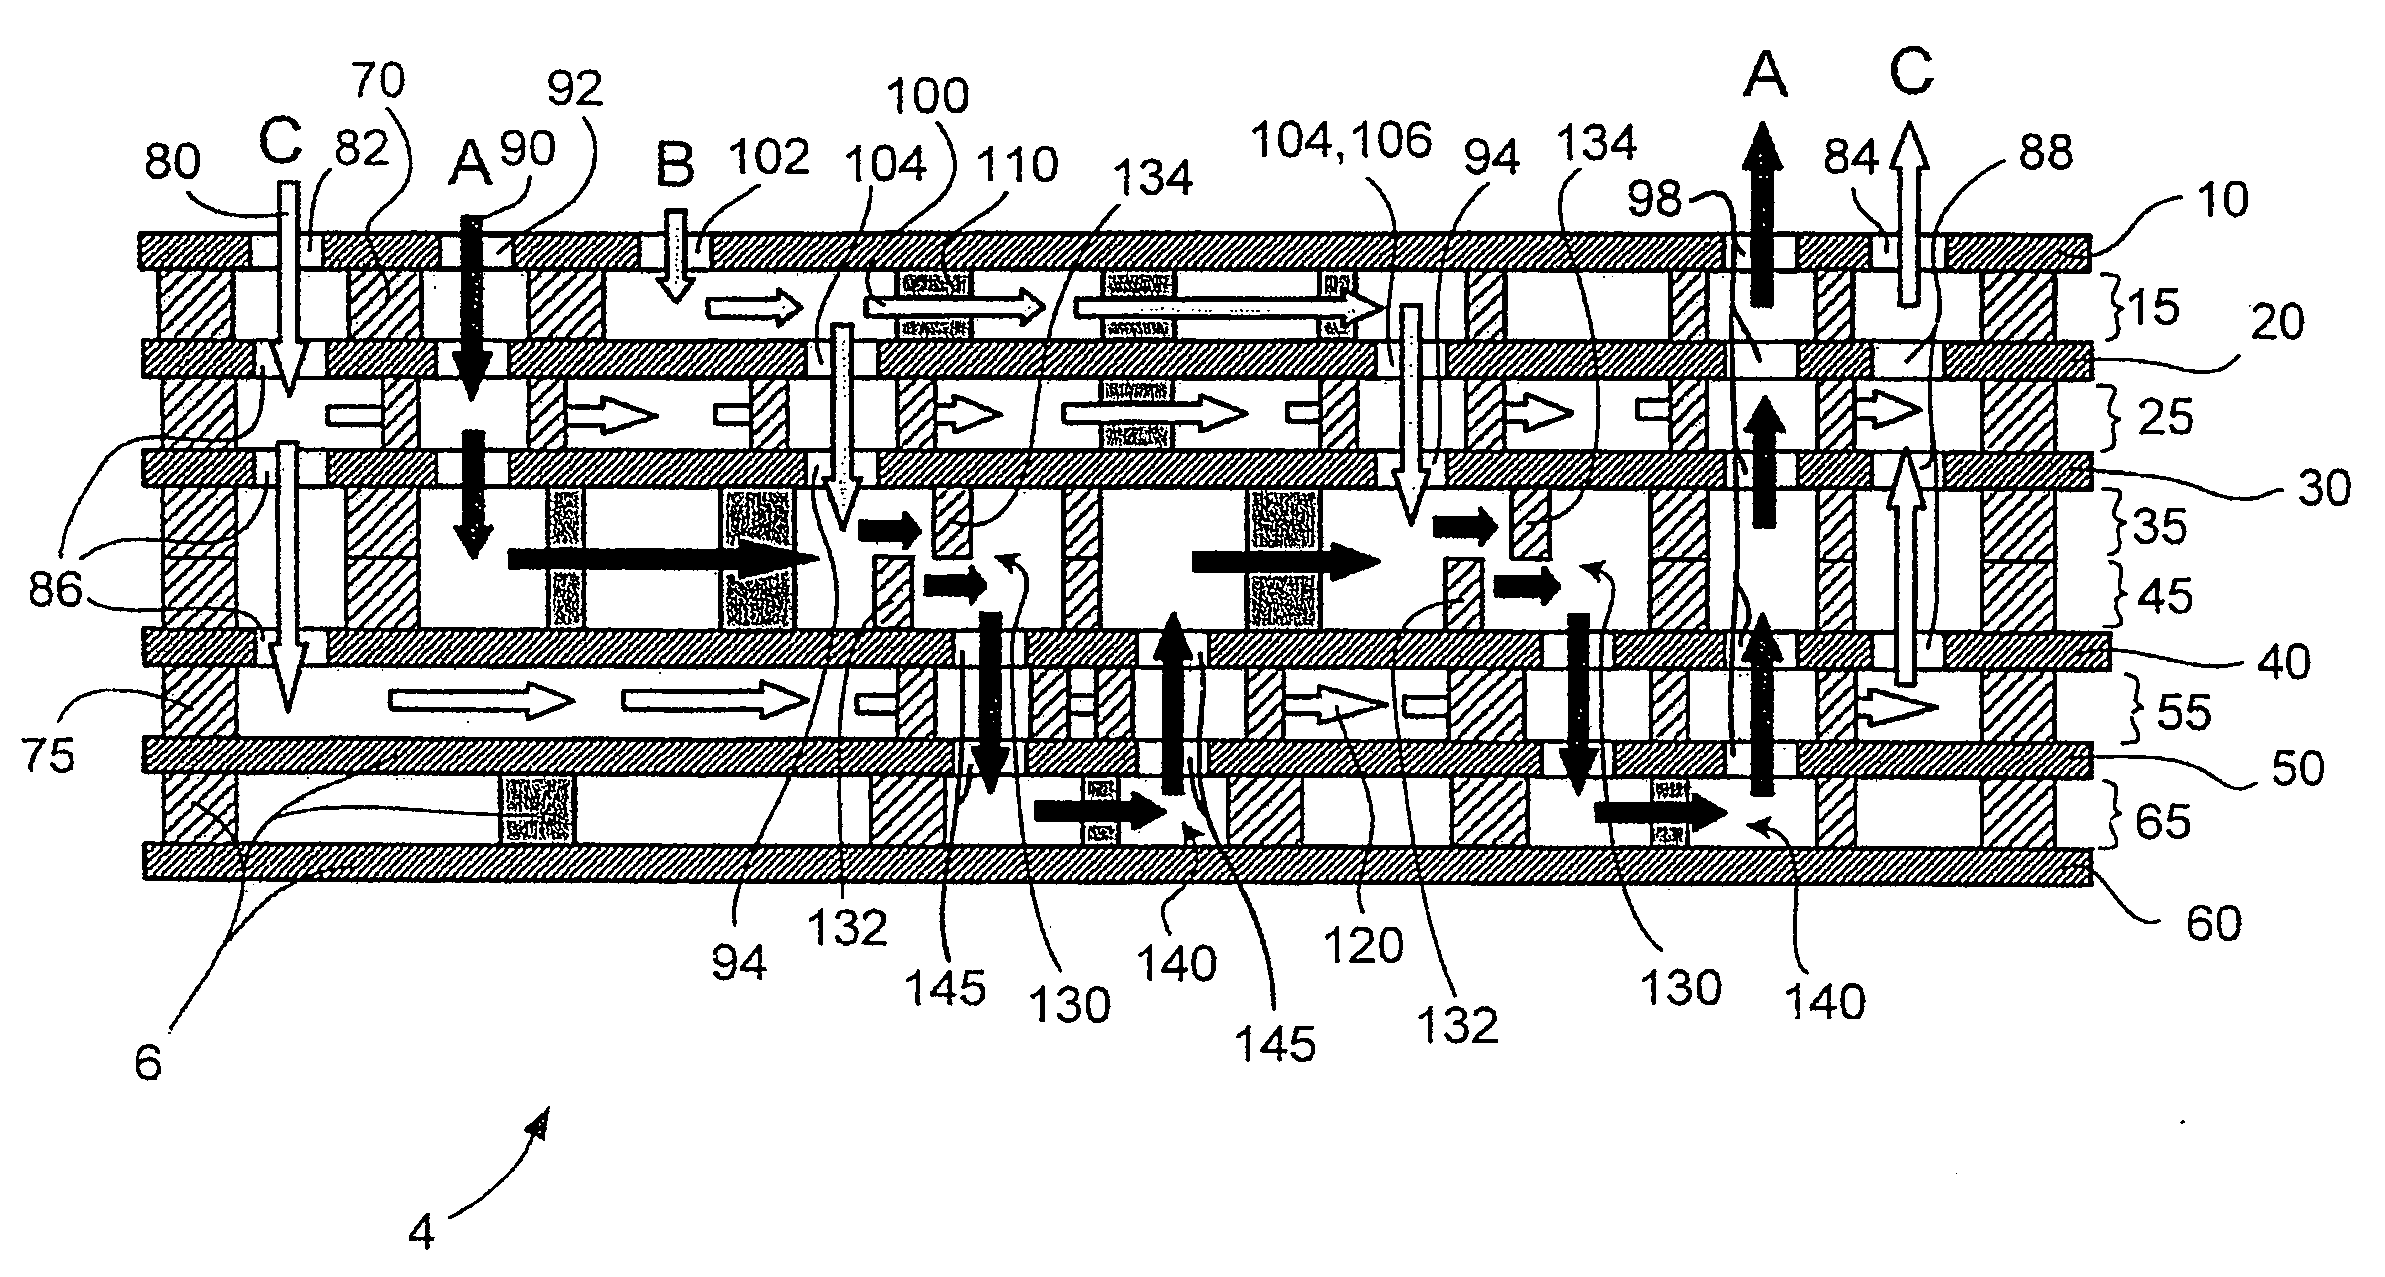 High throughput thermally tempered microreactor devices and methods